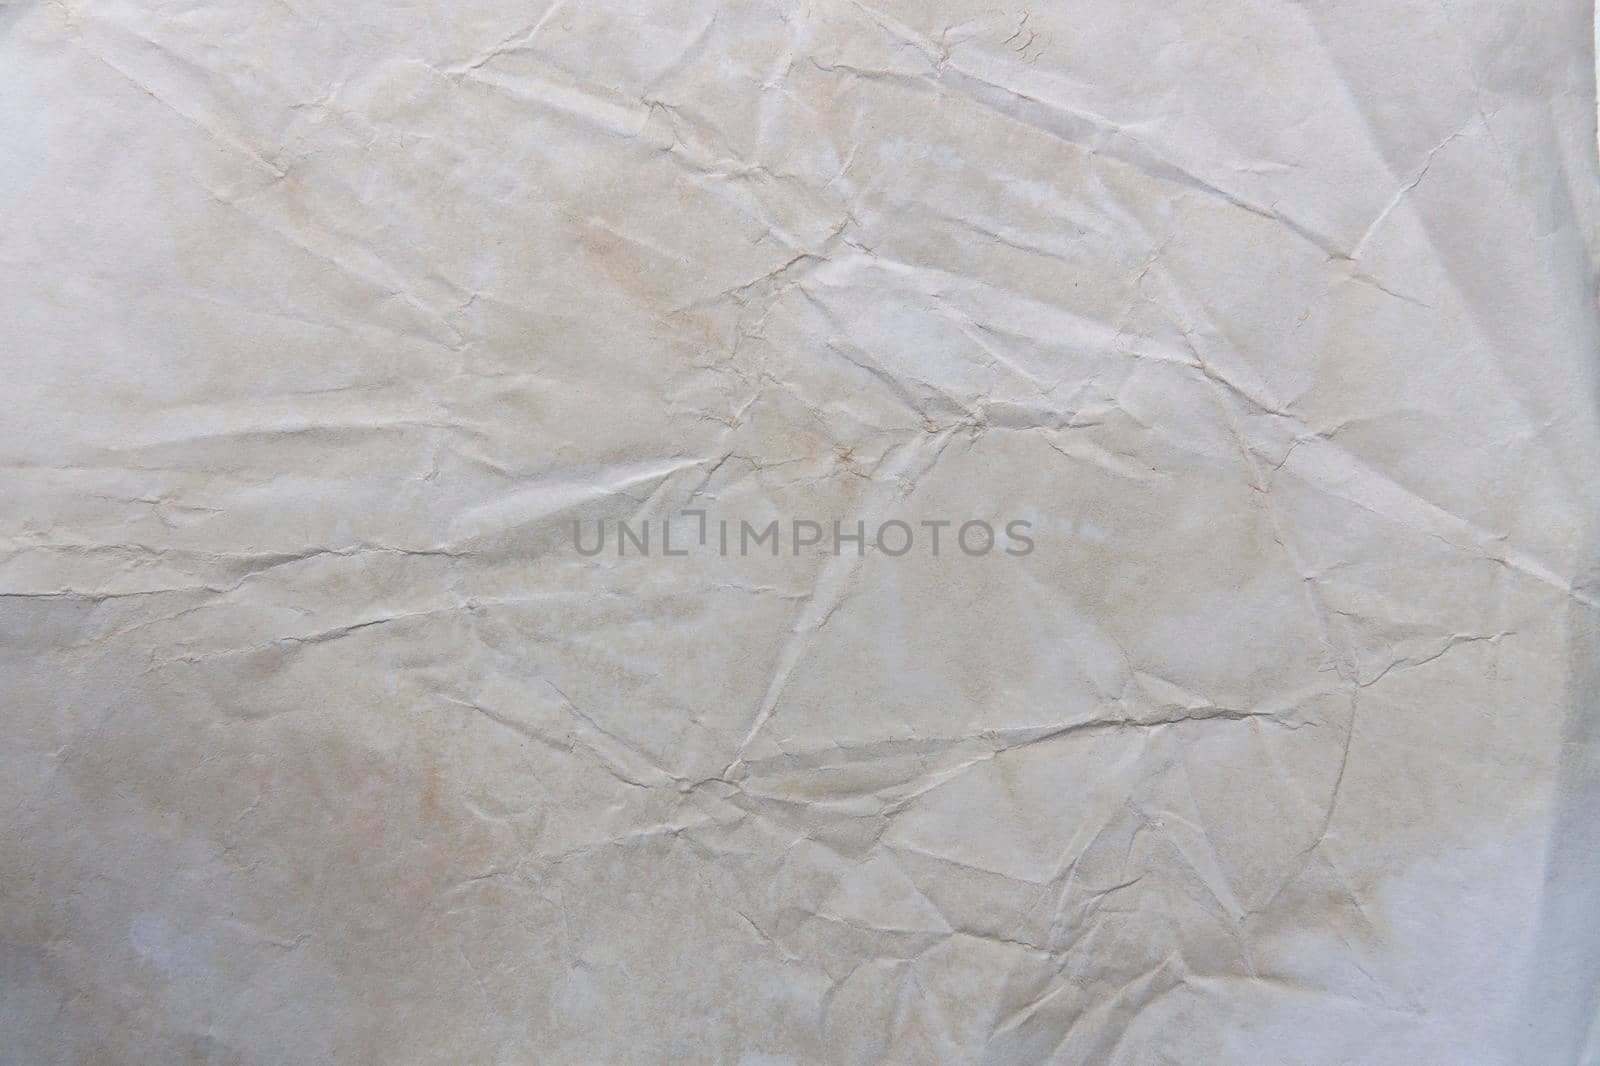 Texture wrinkled surface of yellowed old paper by elenarostunova